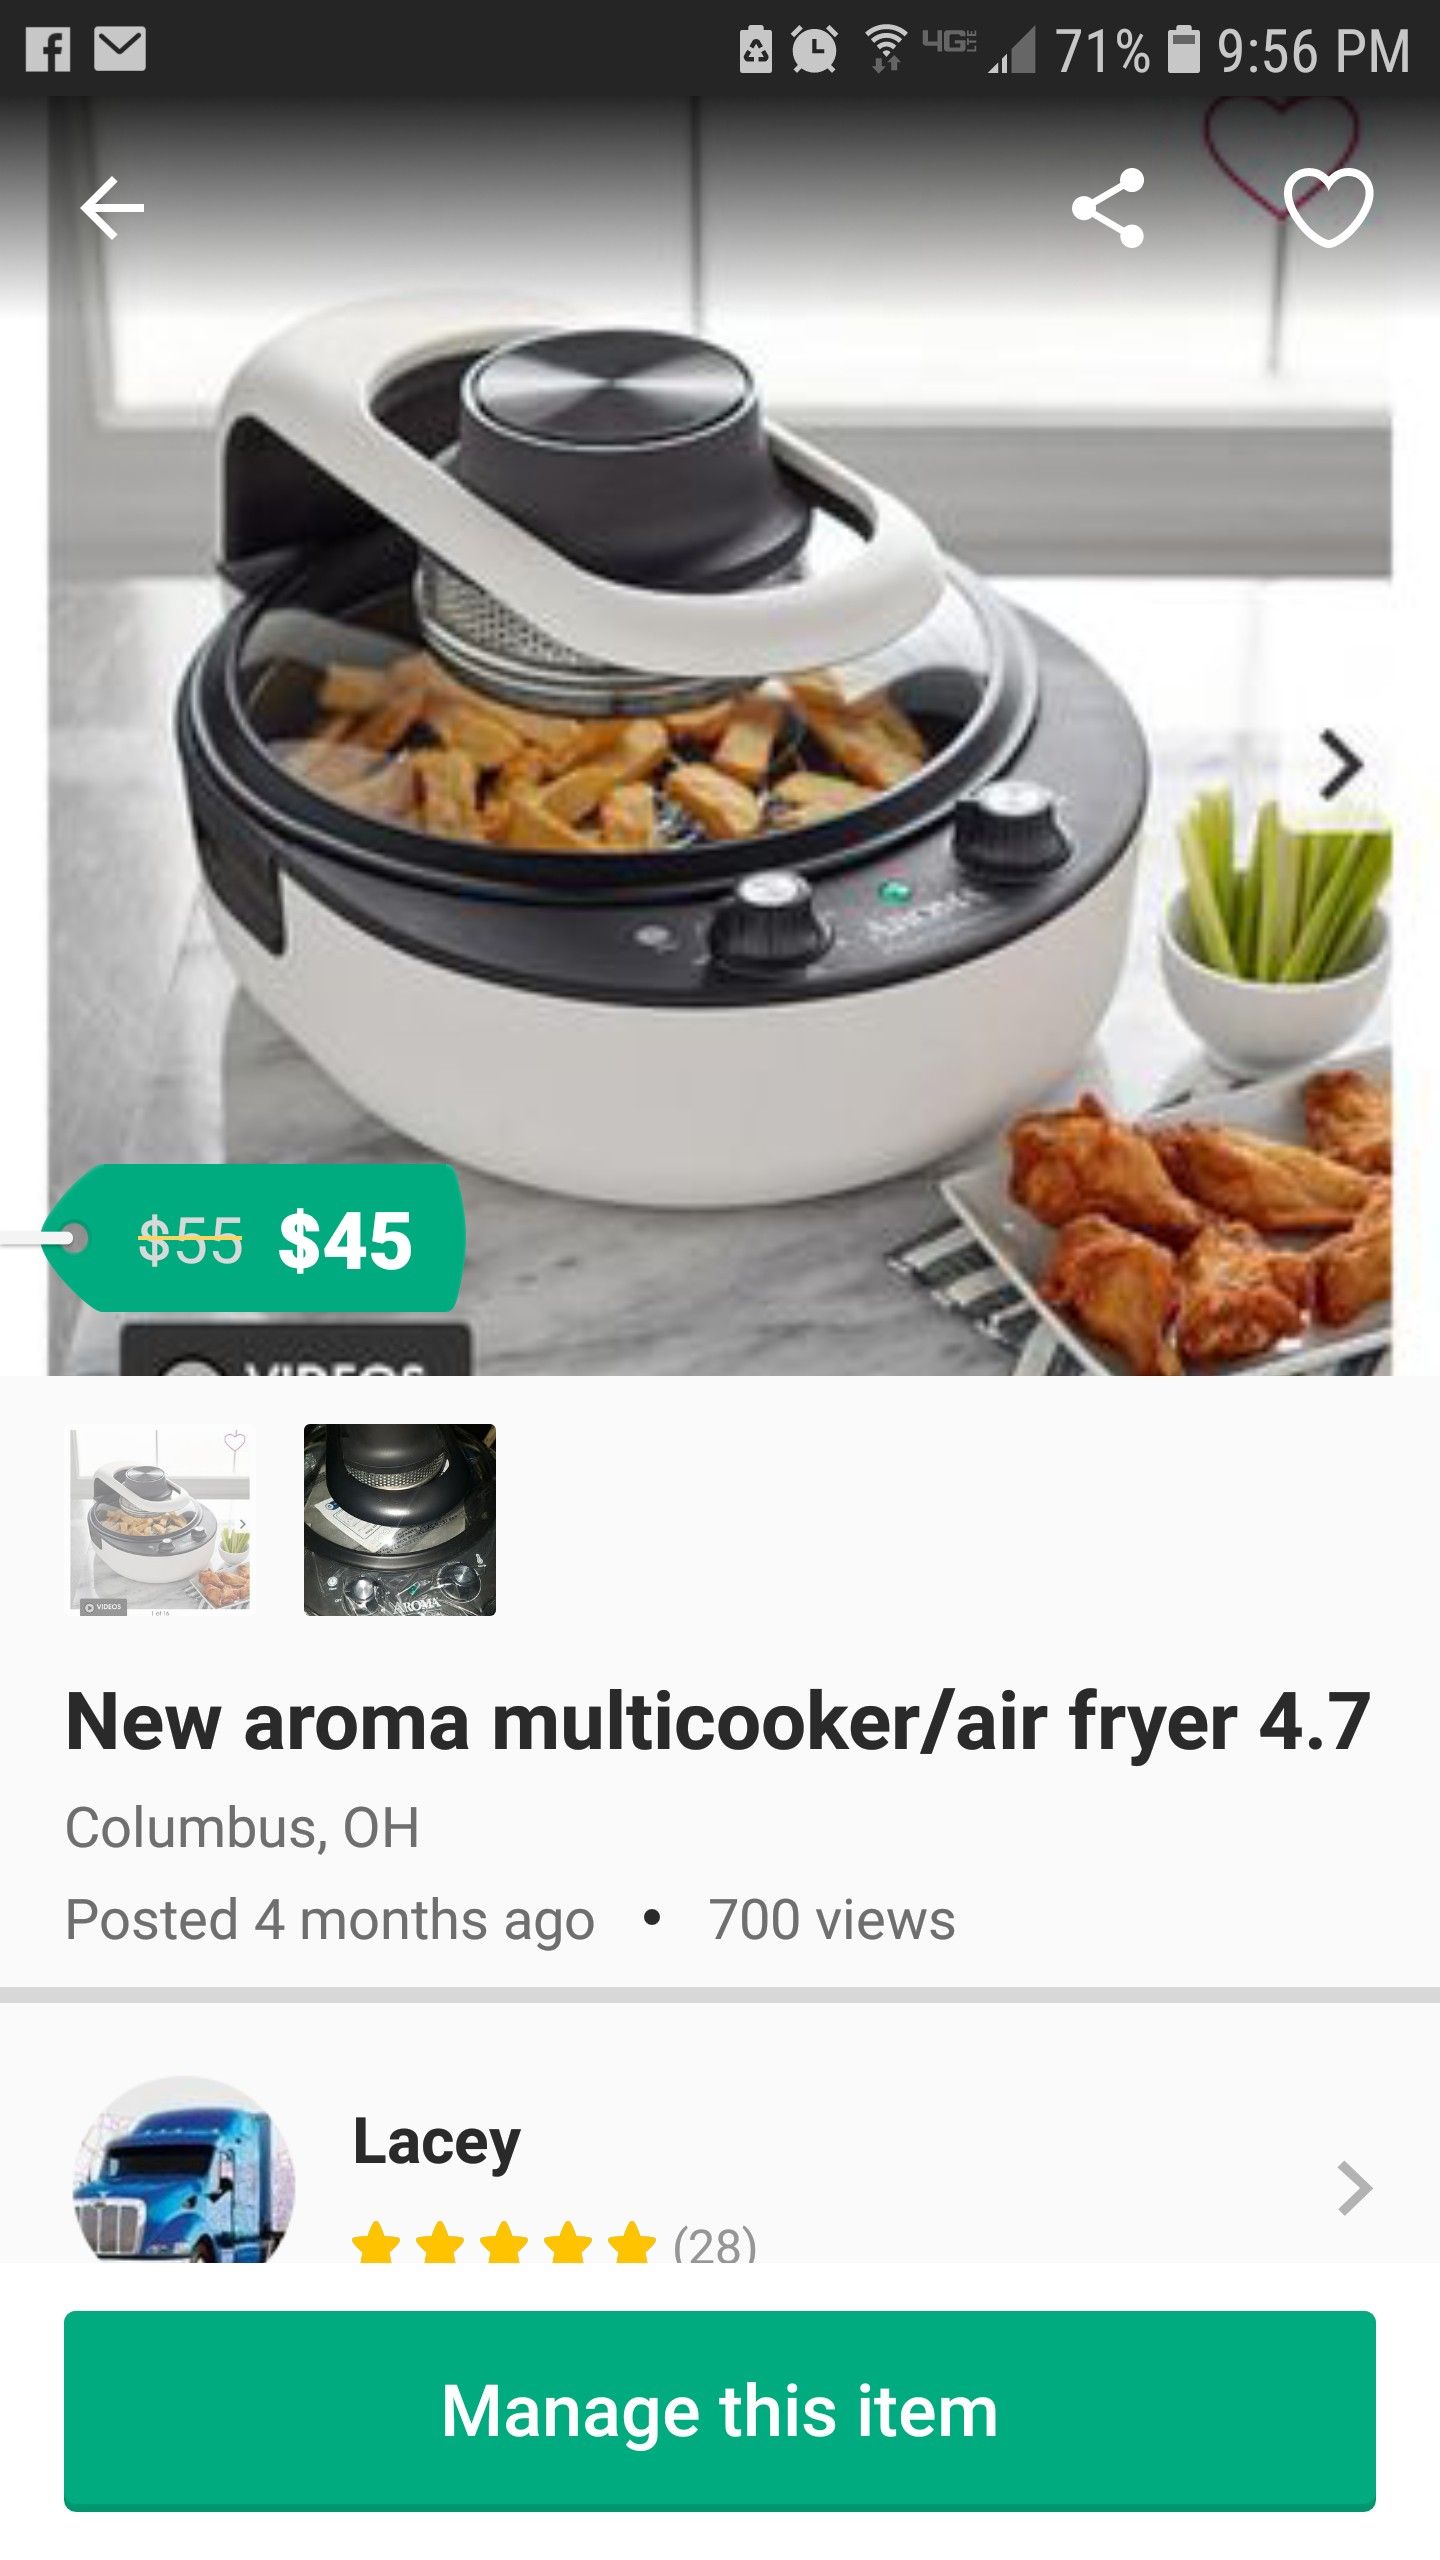 New airfry/ multicooker